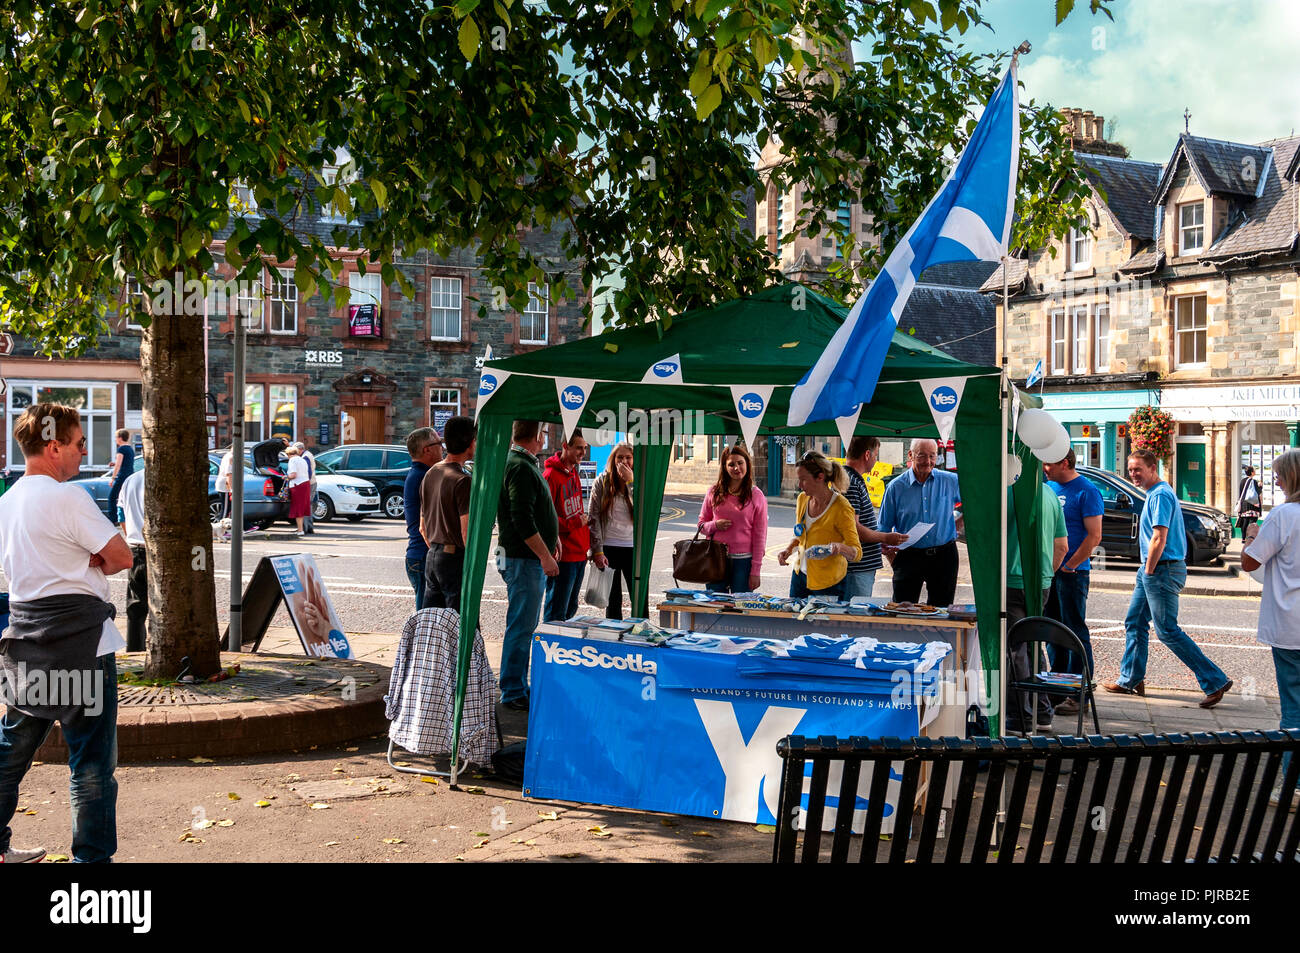 People gather around a kiosk giving out information supporting vote leave during the Scottish referendum in the bustling market town of Aberfeldy Stock Photo